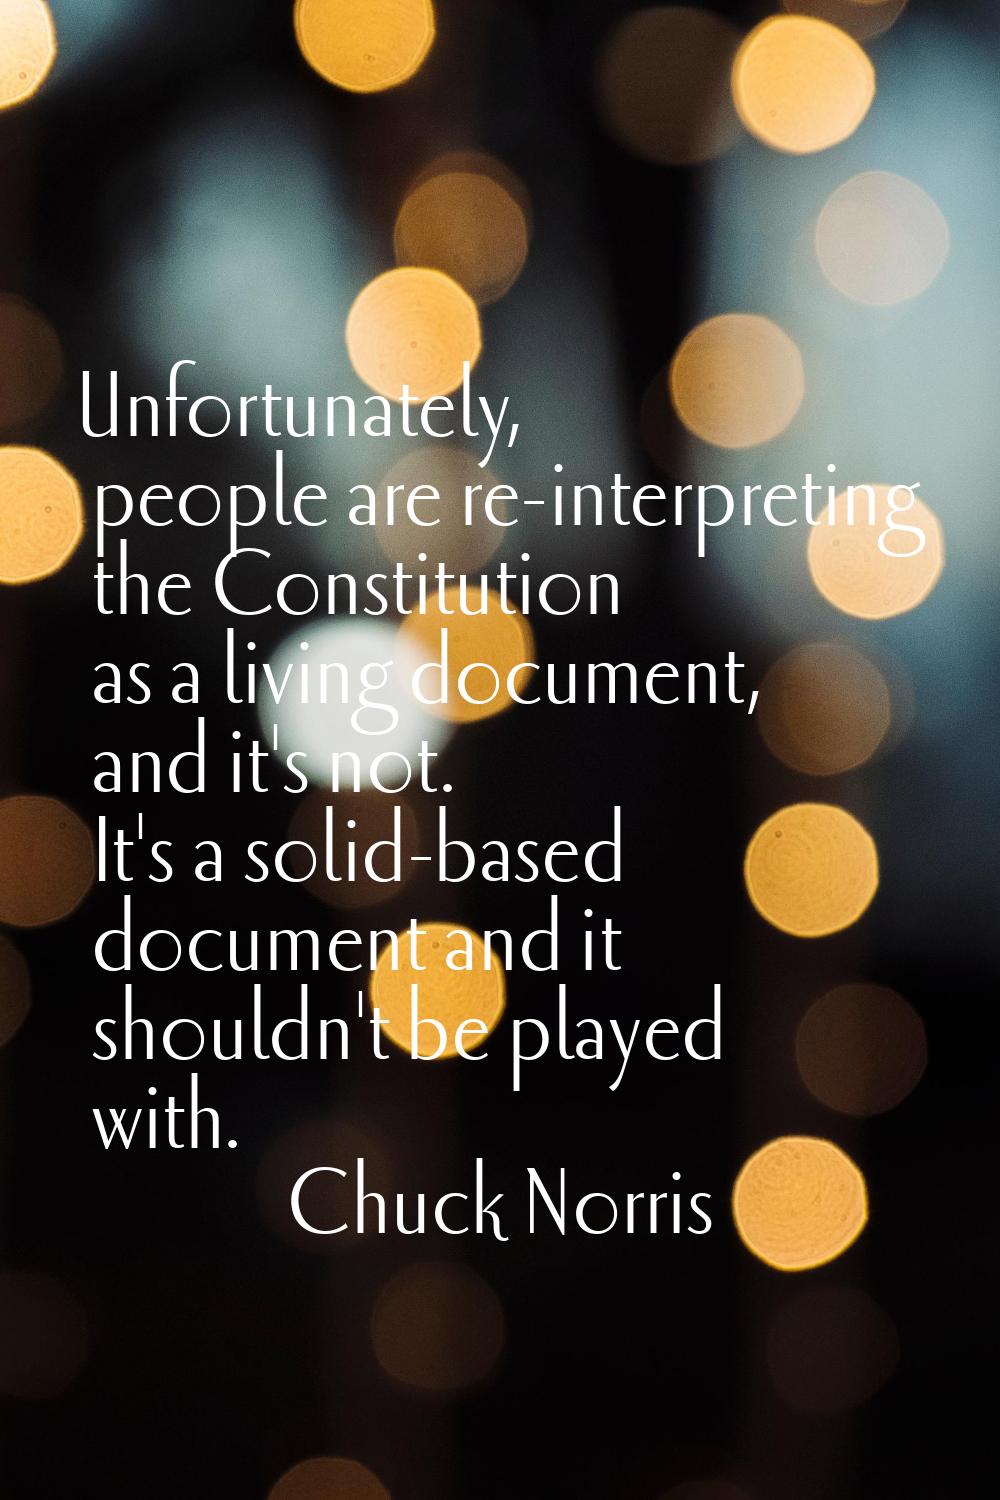 Unfortunately, people are re-interpreting the Constitution as a living document, and it's not. It's